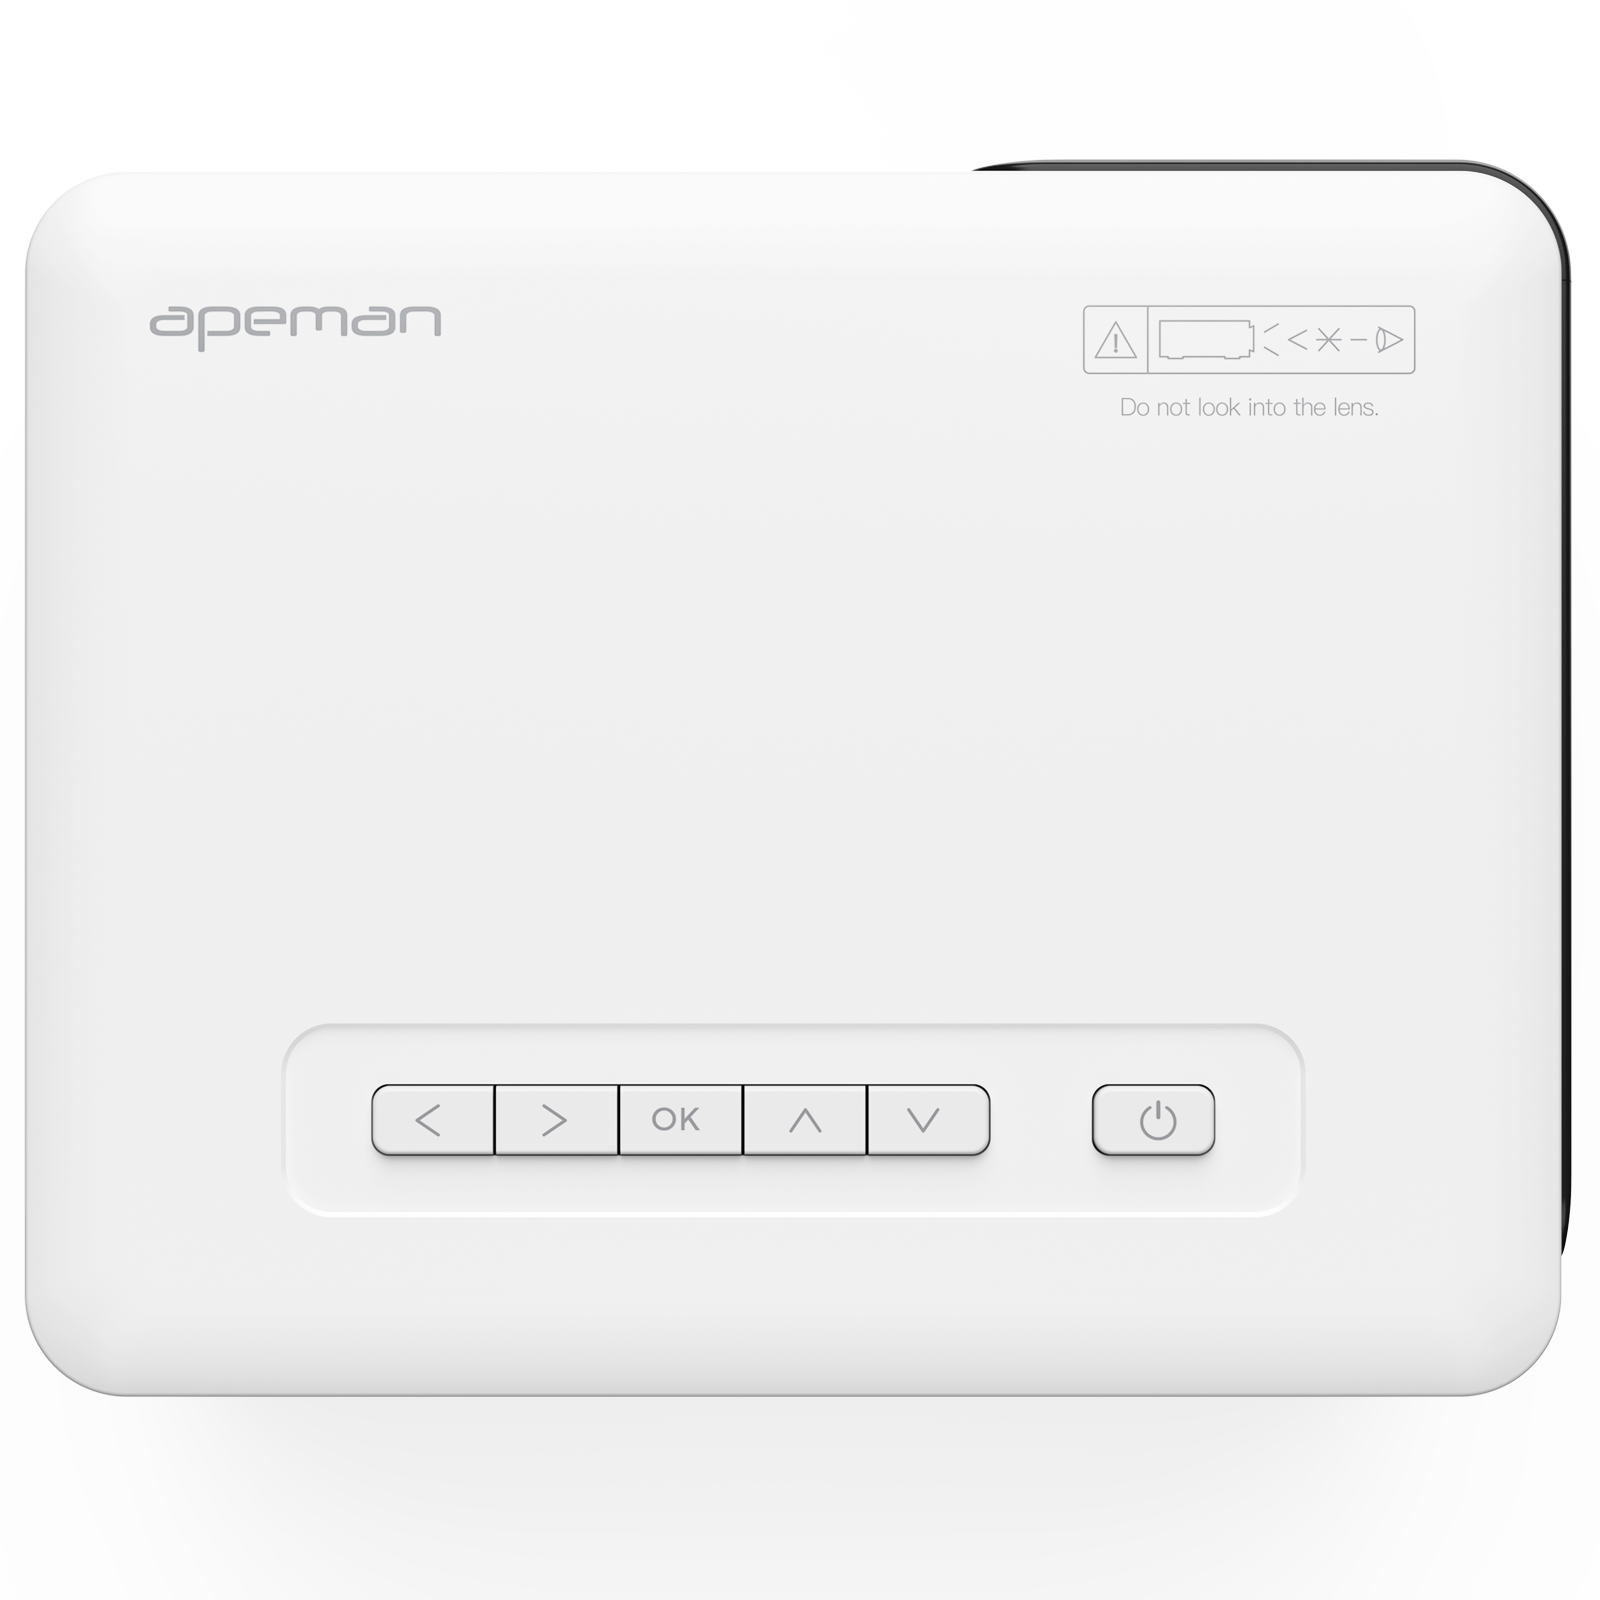 apeman LC500 Lower Noise Cost-effective Projector